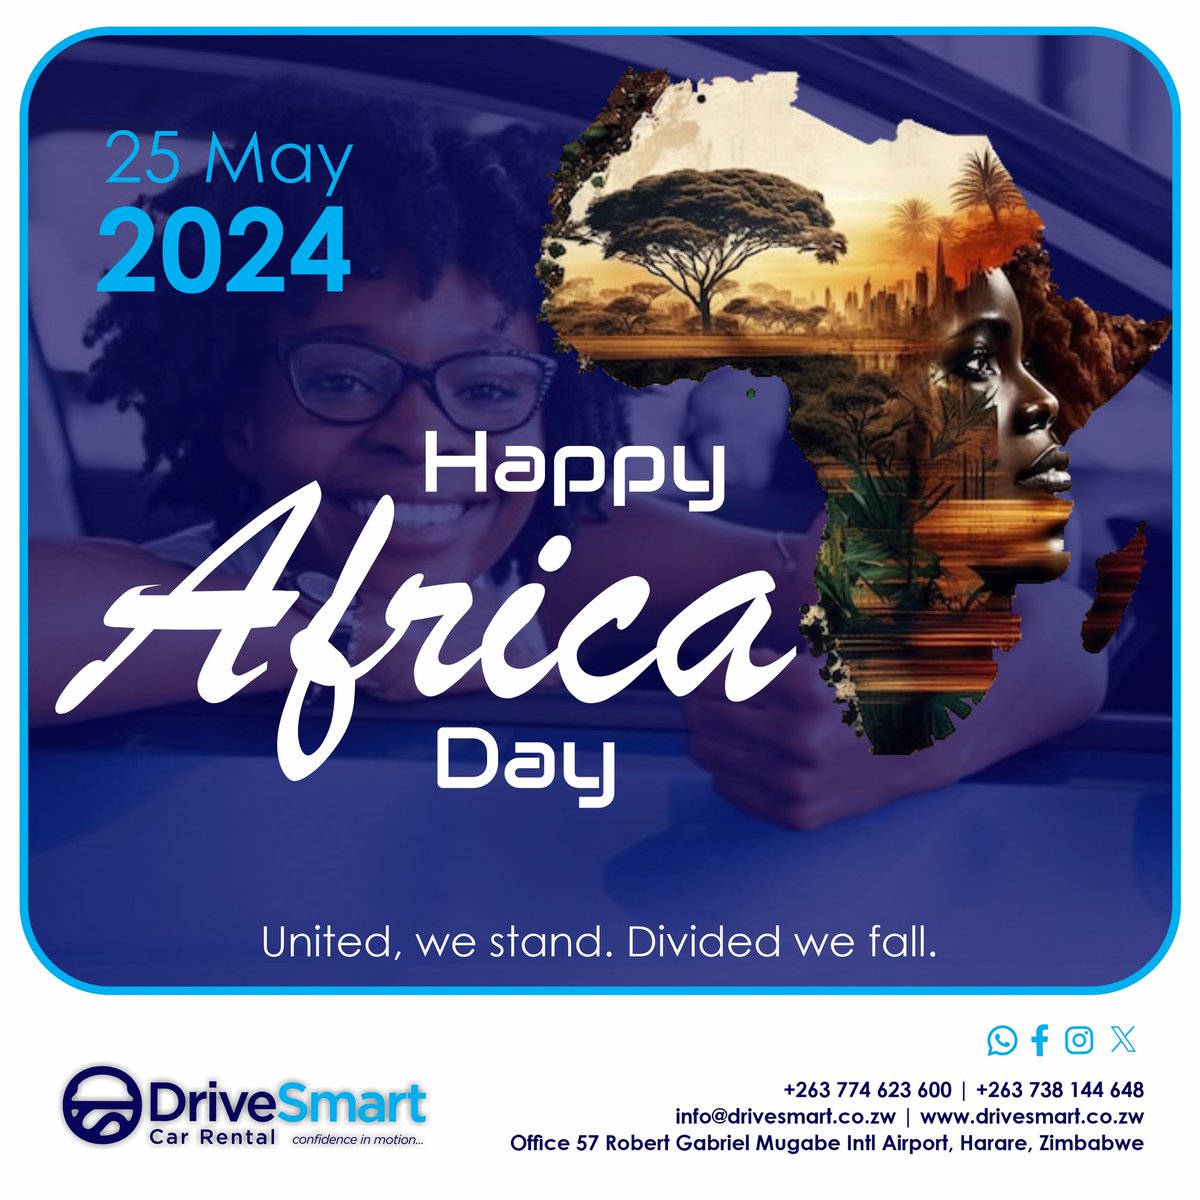 Happy Africa Day! Today we celebrate the rich cultures, vibrant traditions, and incredible diversity of our continent.

#HappyAfricaDay
#AiportTransfers
#DriveSmart
#CarRental
#ConfidenceInMotion